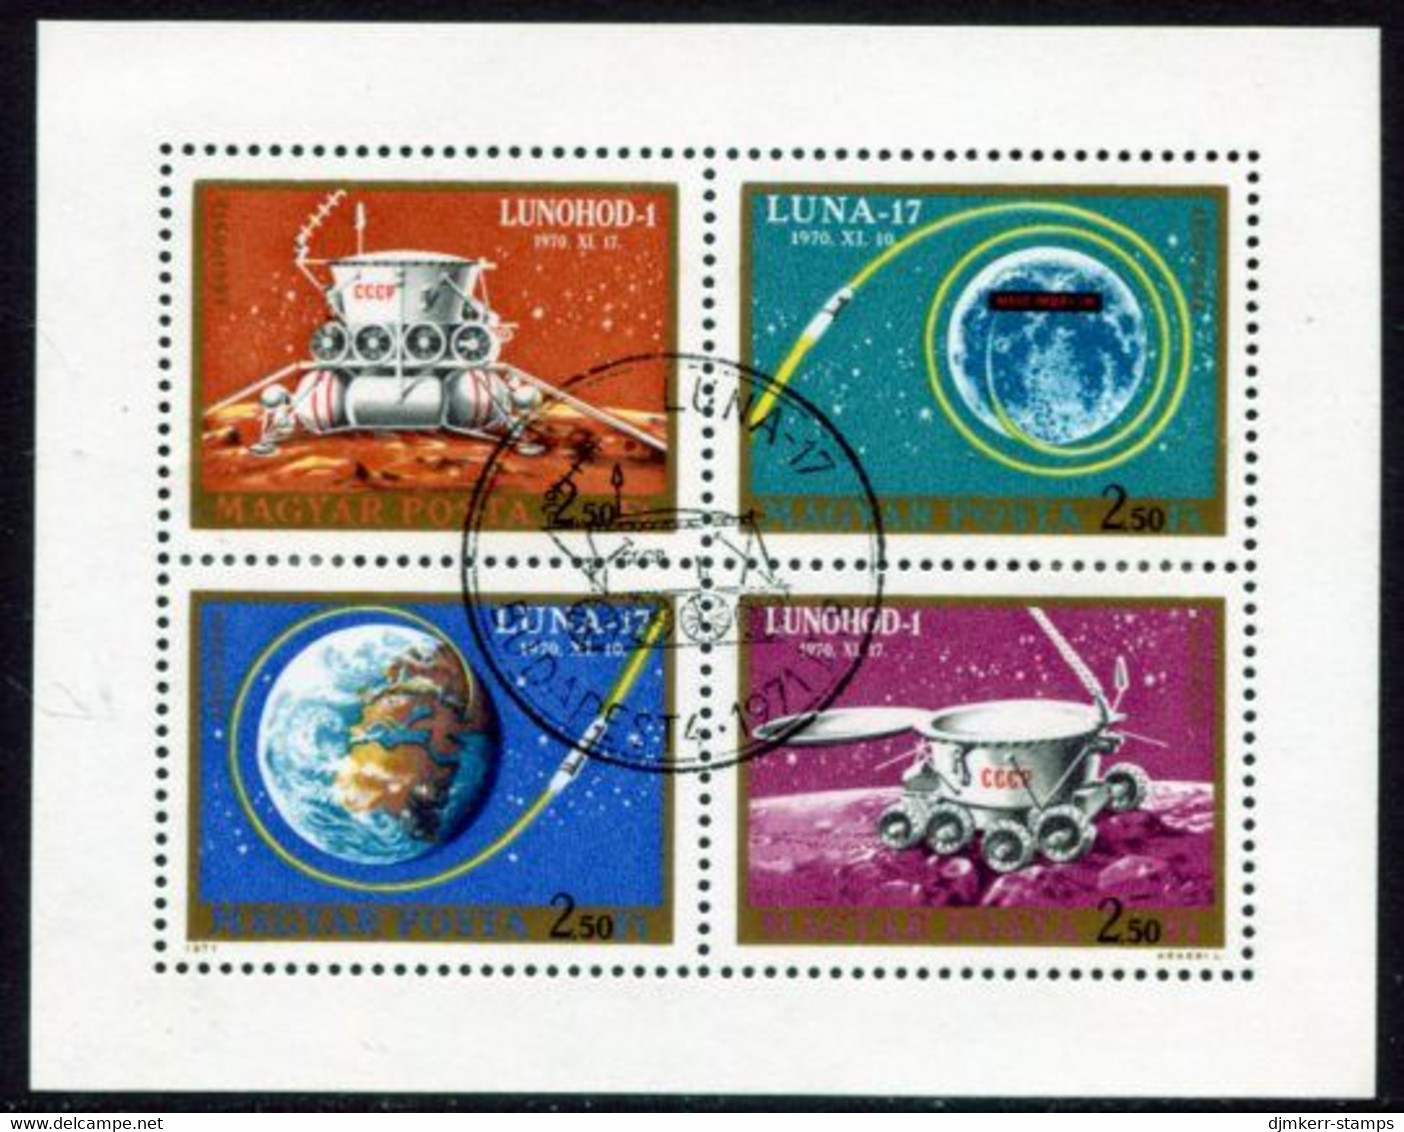 HUNGARY 1971 Luna 17 Moon Landing Sheetlet Used  Michel 2654-57A Kb - Used Stamps